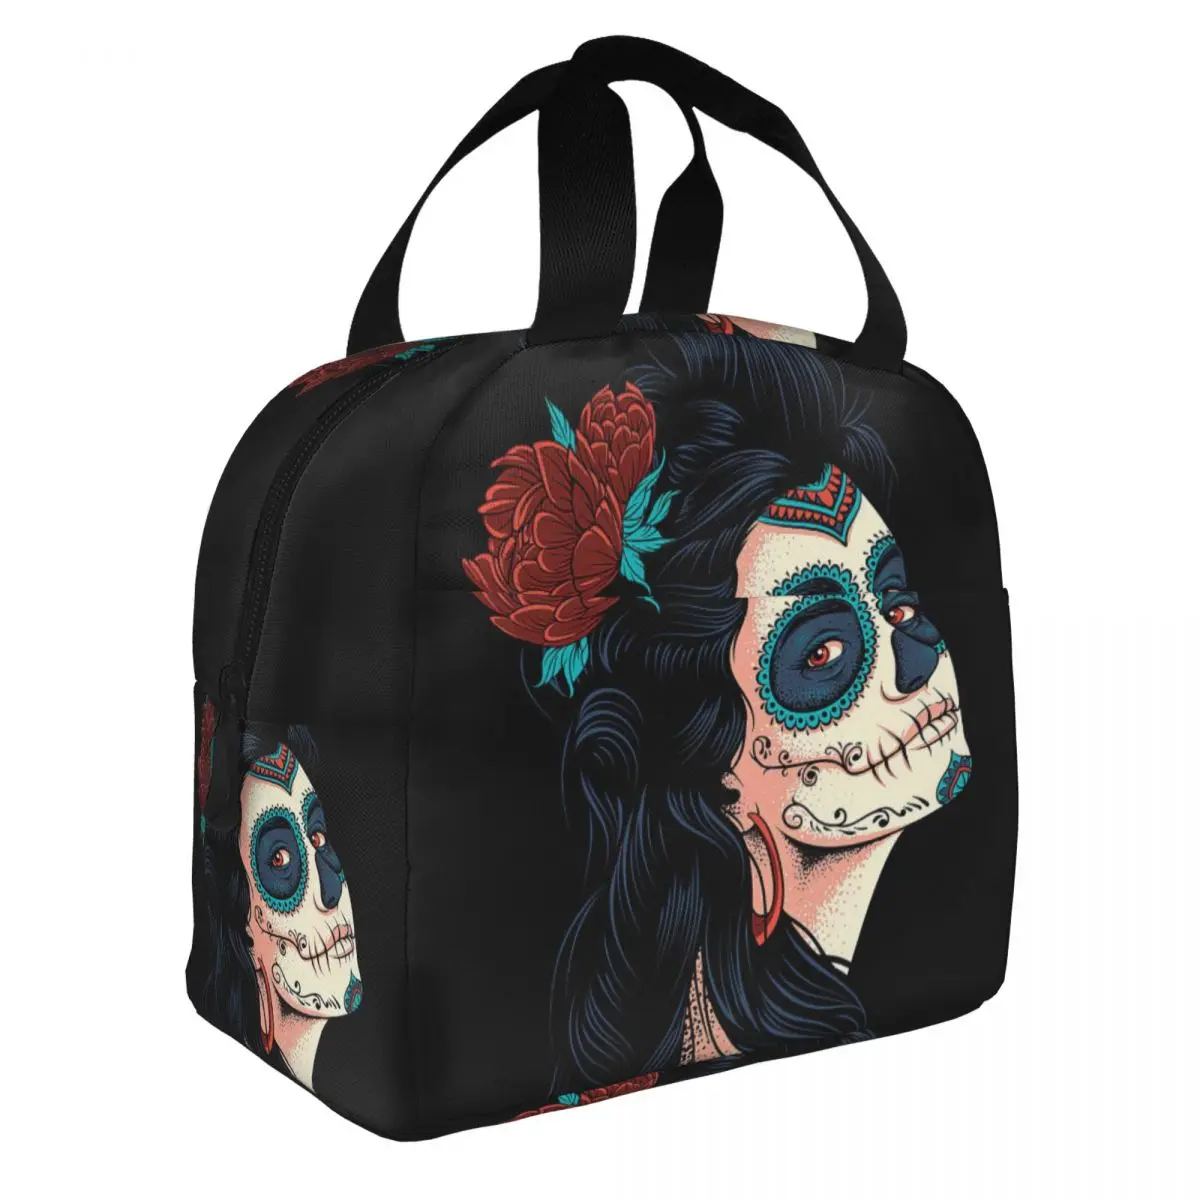 Lady Of The Dead,La Calavera Catrina Lunch Bento Bag Portable Aluminum Foil thickened Thermal Cloth Lunch Bag for Women Men Boy